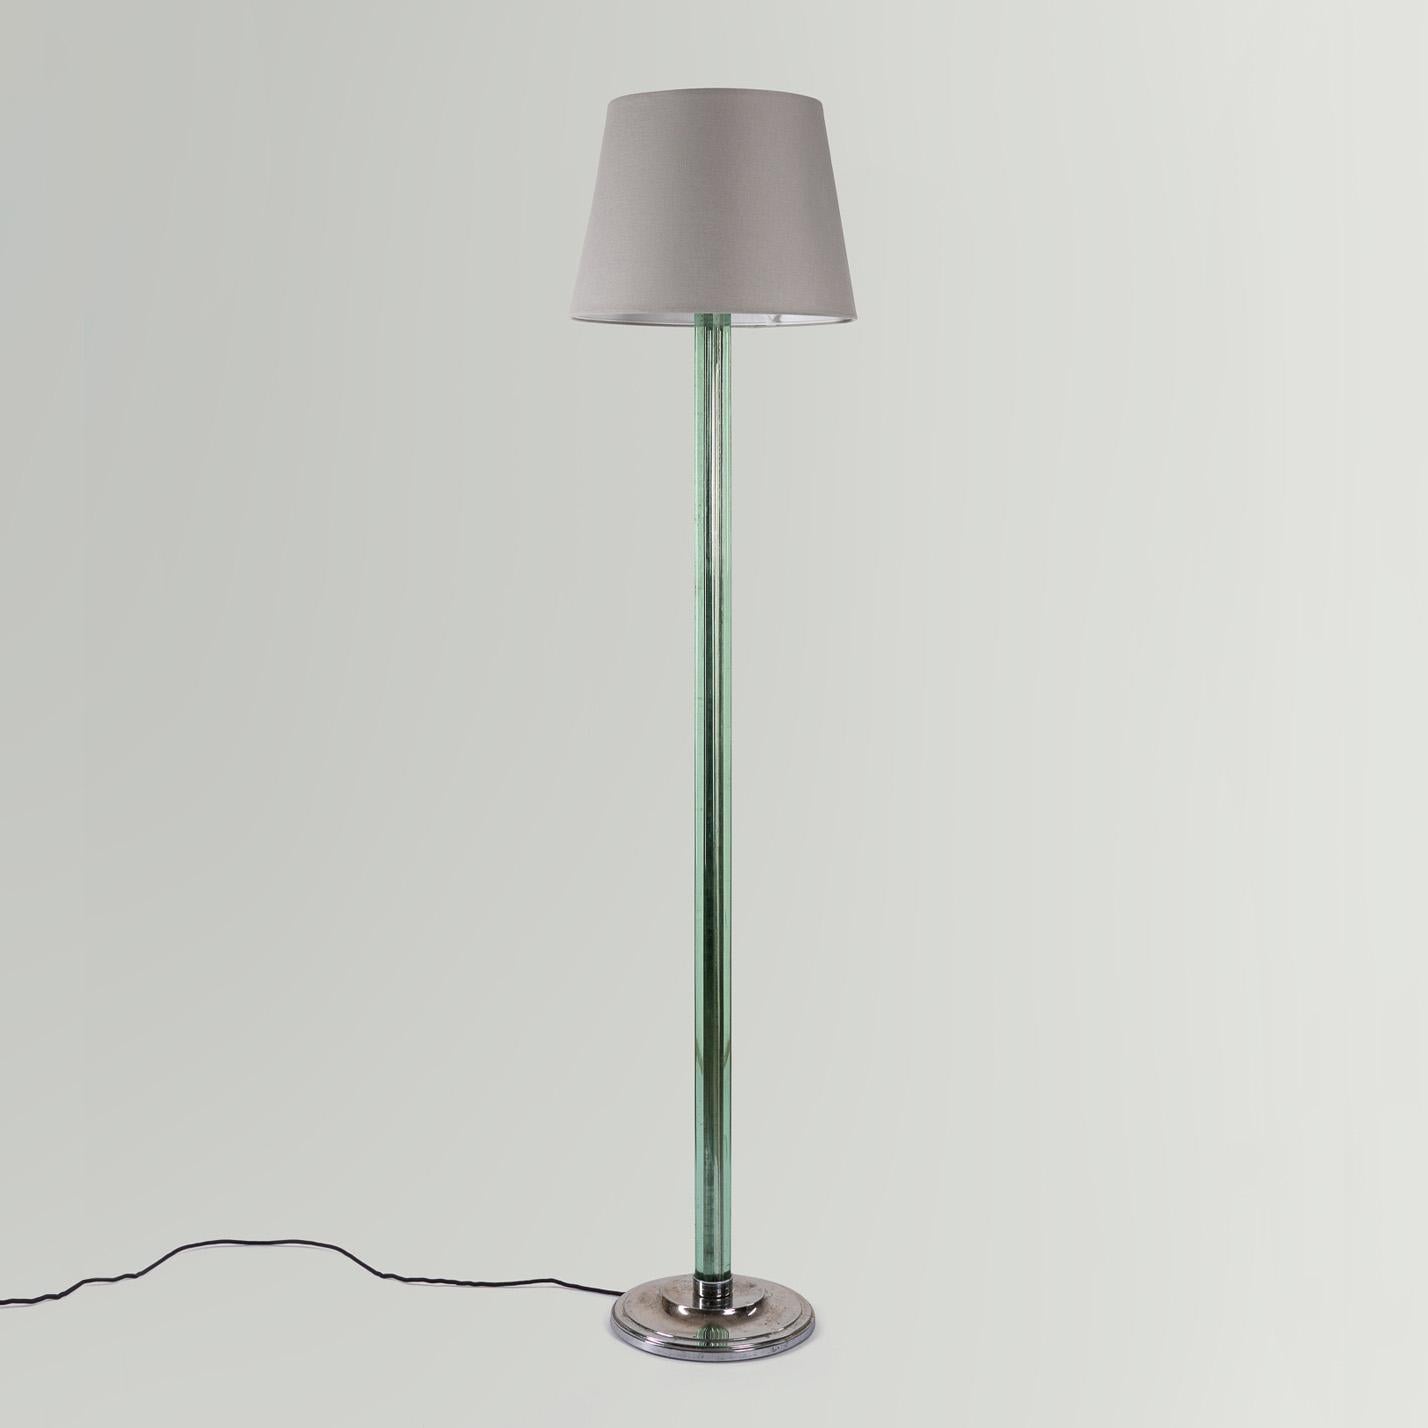 Plated Sculptural Tall Art Deco Floor Lamp in Chrome and Glass, 1930s For Sale